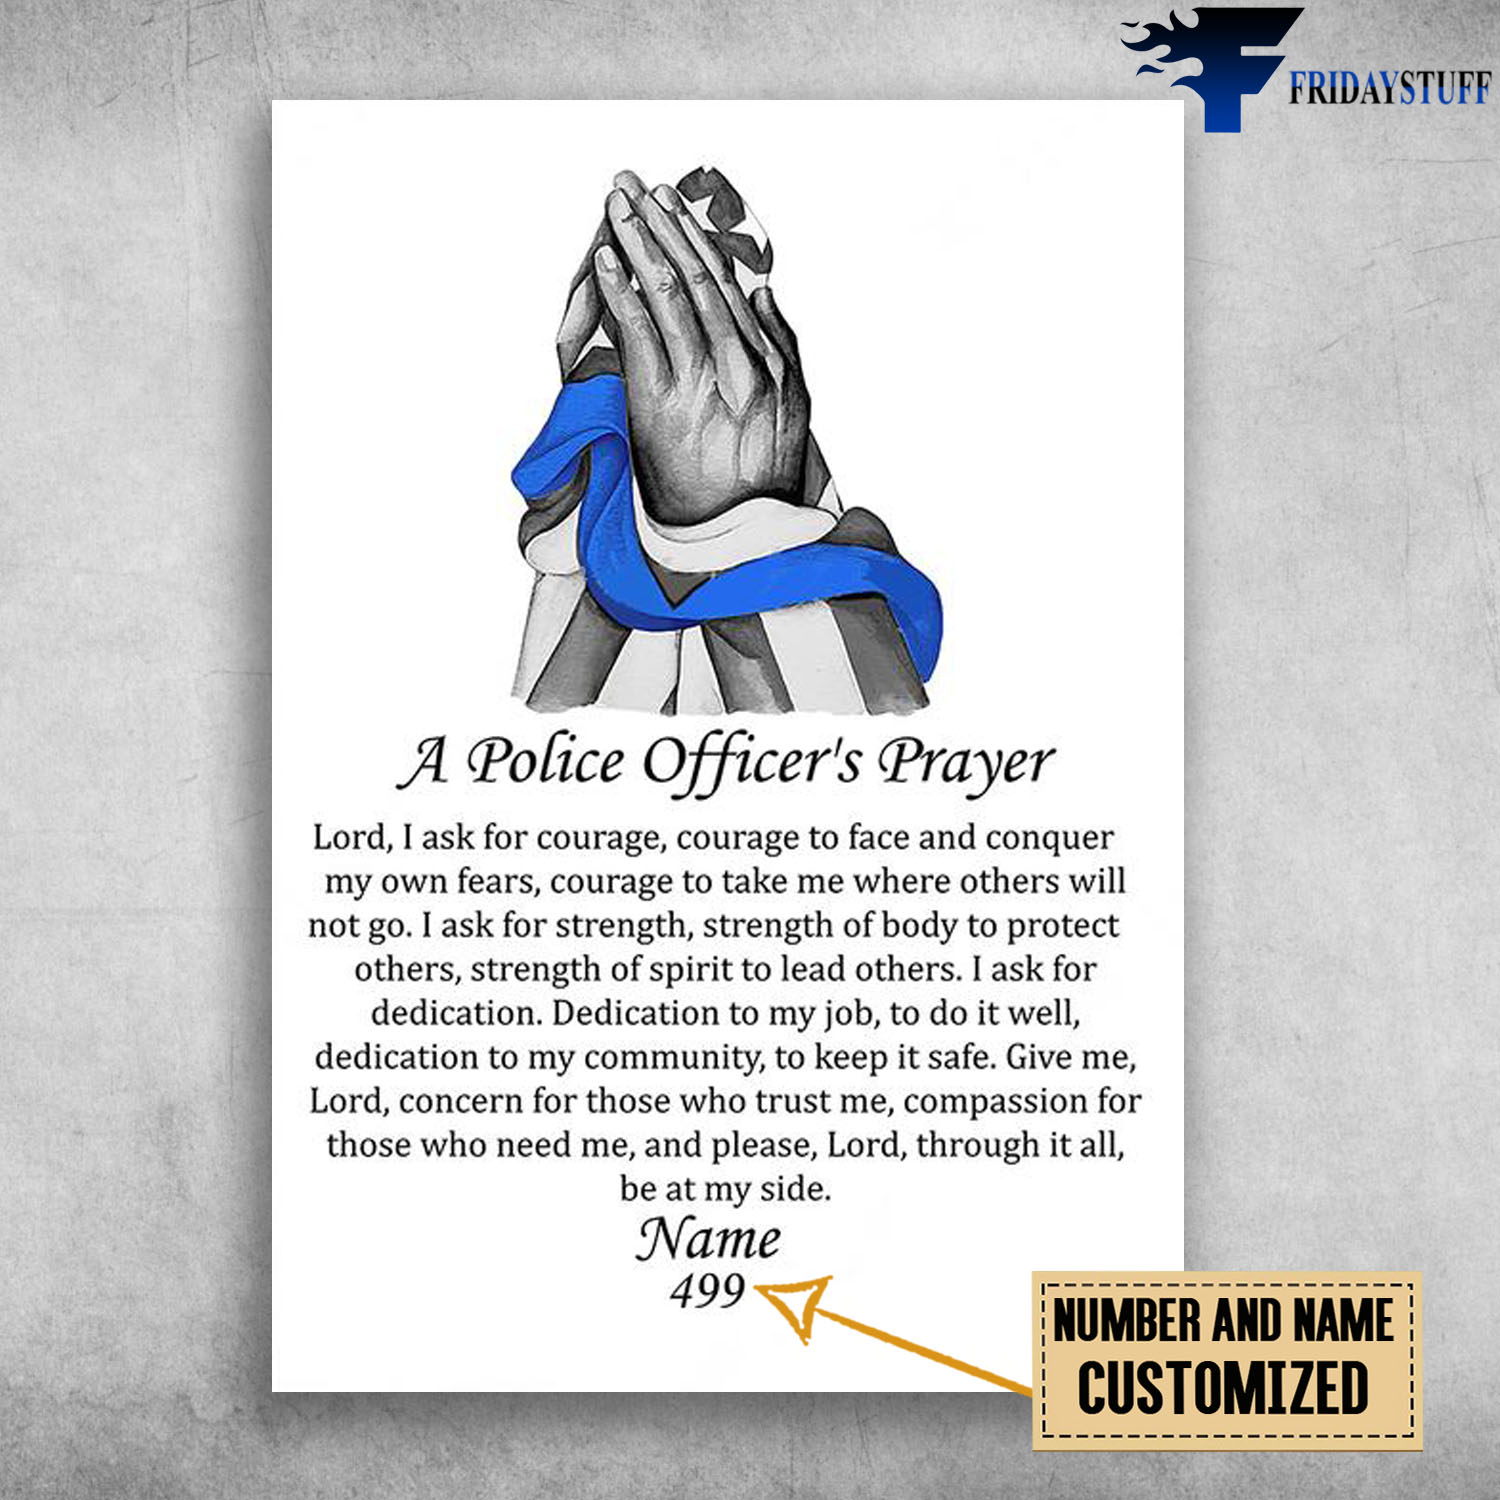 Police Prayer, A Pilice Office's Prayer, Lord, I Ask For Courage, Courage To Face And Conquer My Own Fears, Courage To Take Me Where Others, Will Not Go, Through It All, Be At My Side